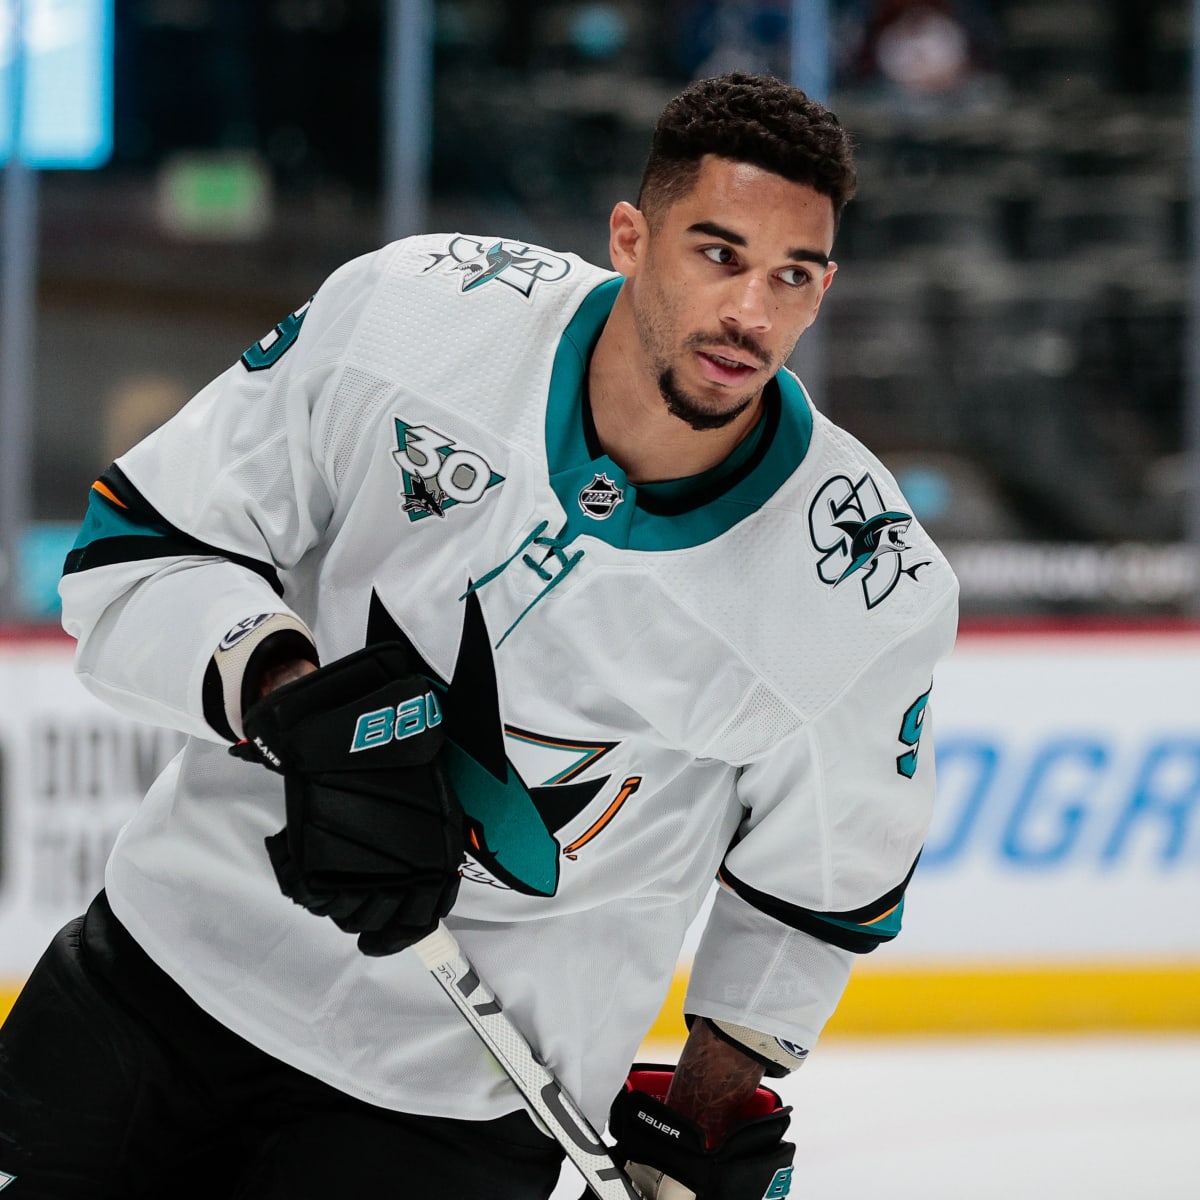 Report: Evander Kane Facing Sexual Assault and Domestic Battery Allegations  - The Hockey News